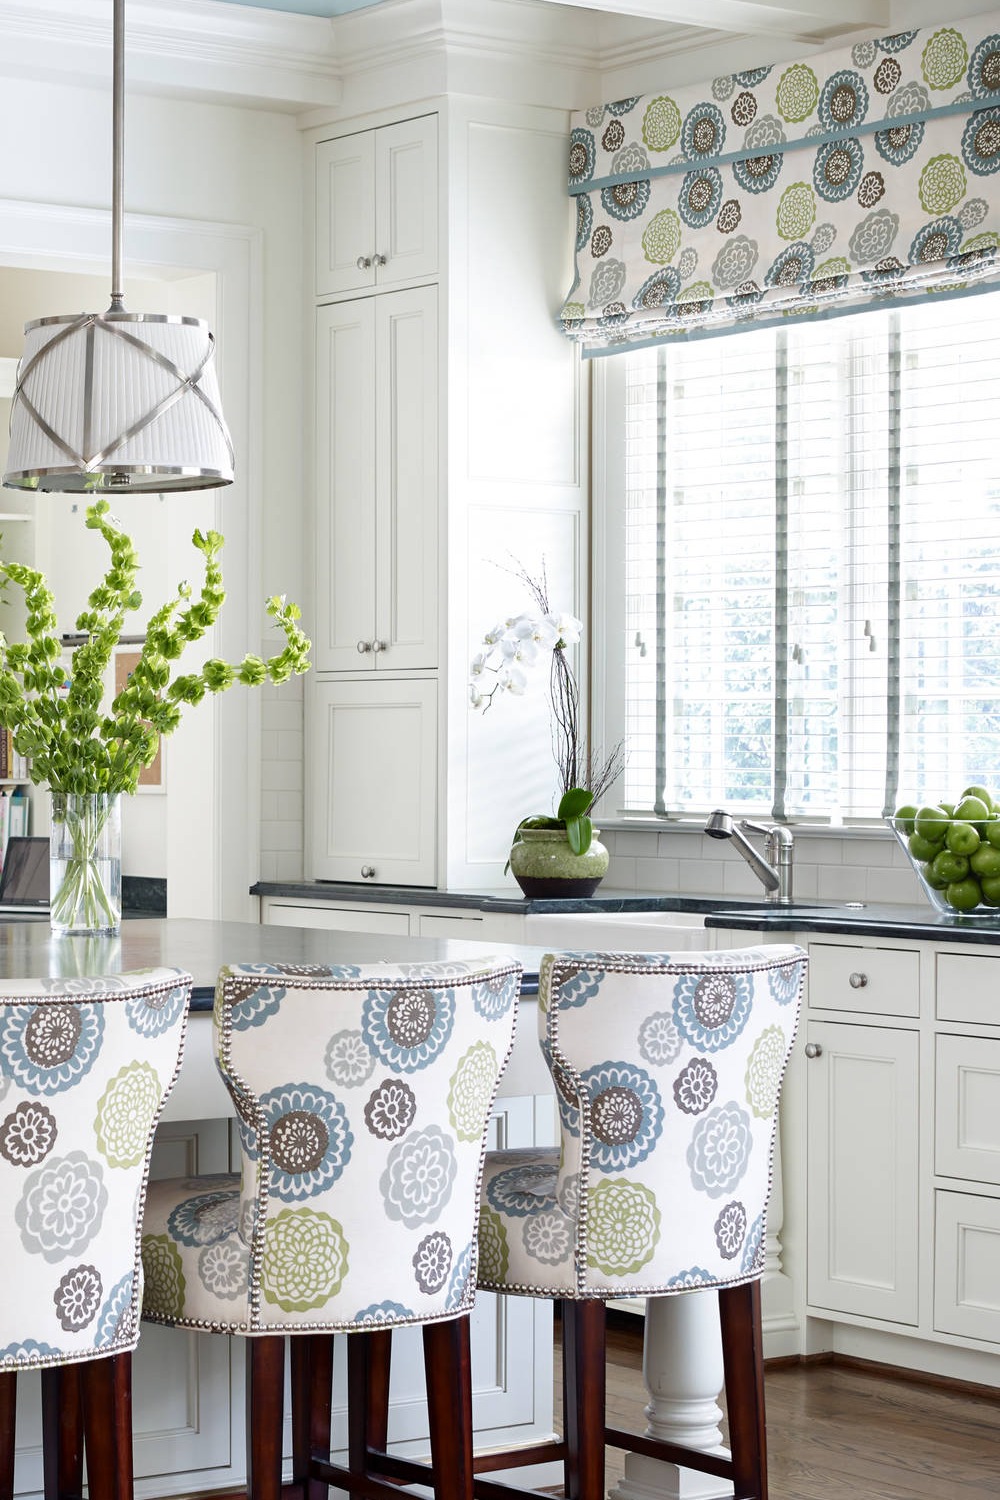 Inviting Kitchen Window Treatments Food Stains Wipe Clean Temperature